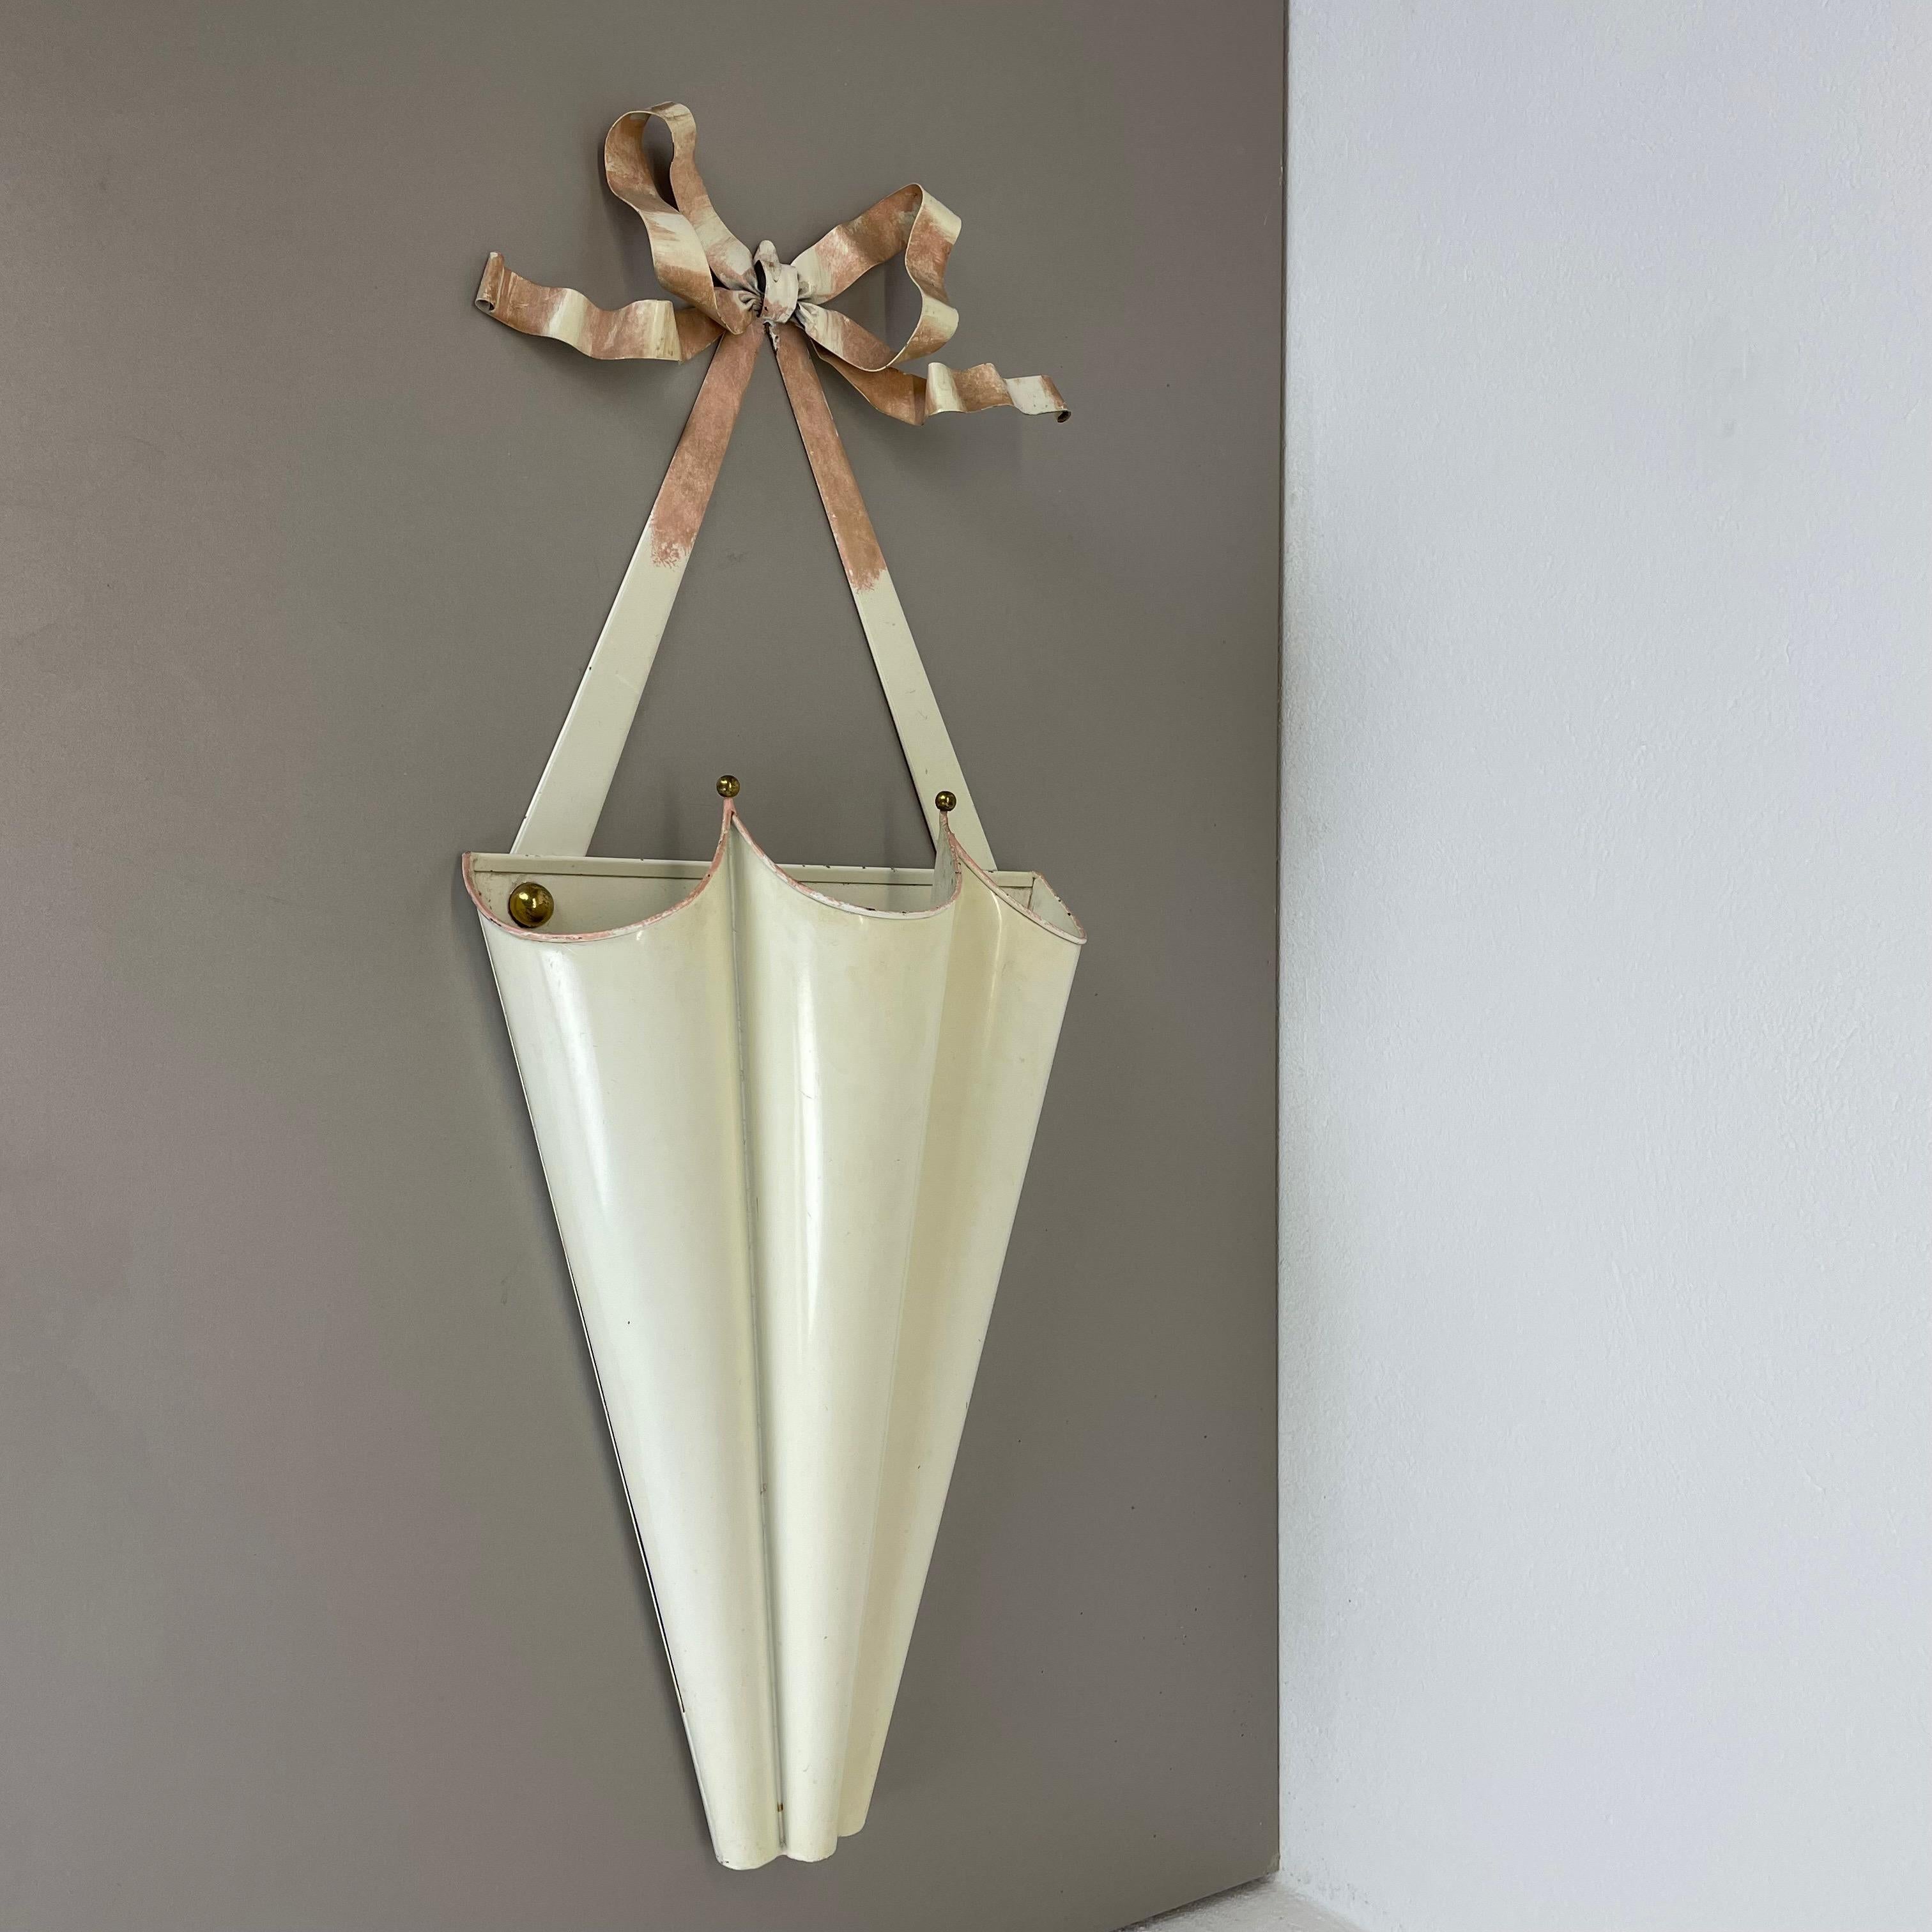 Article:

wall Umbrella holder element in style of Matégot



Origin:

France


Age:

1950s



This original vintage umbrella holder element was produced in the 1950s in France. It is made of solid metal in a white lacquered tone in